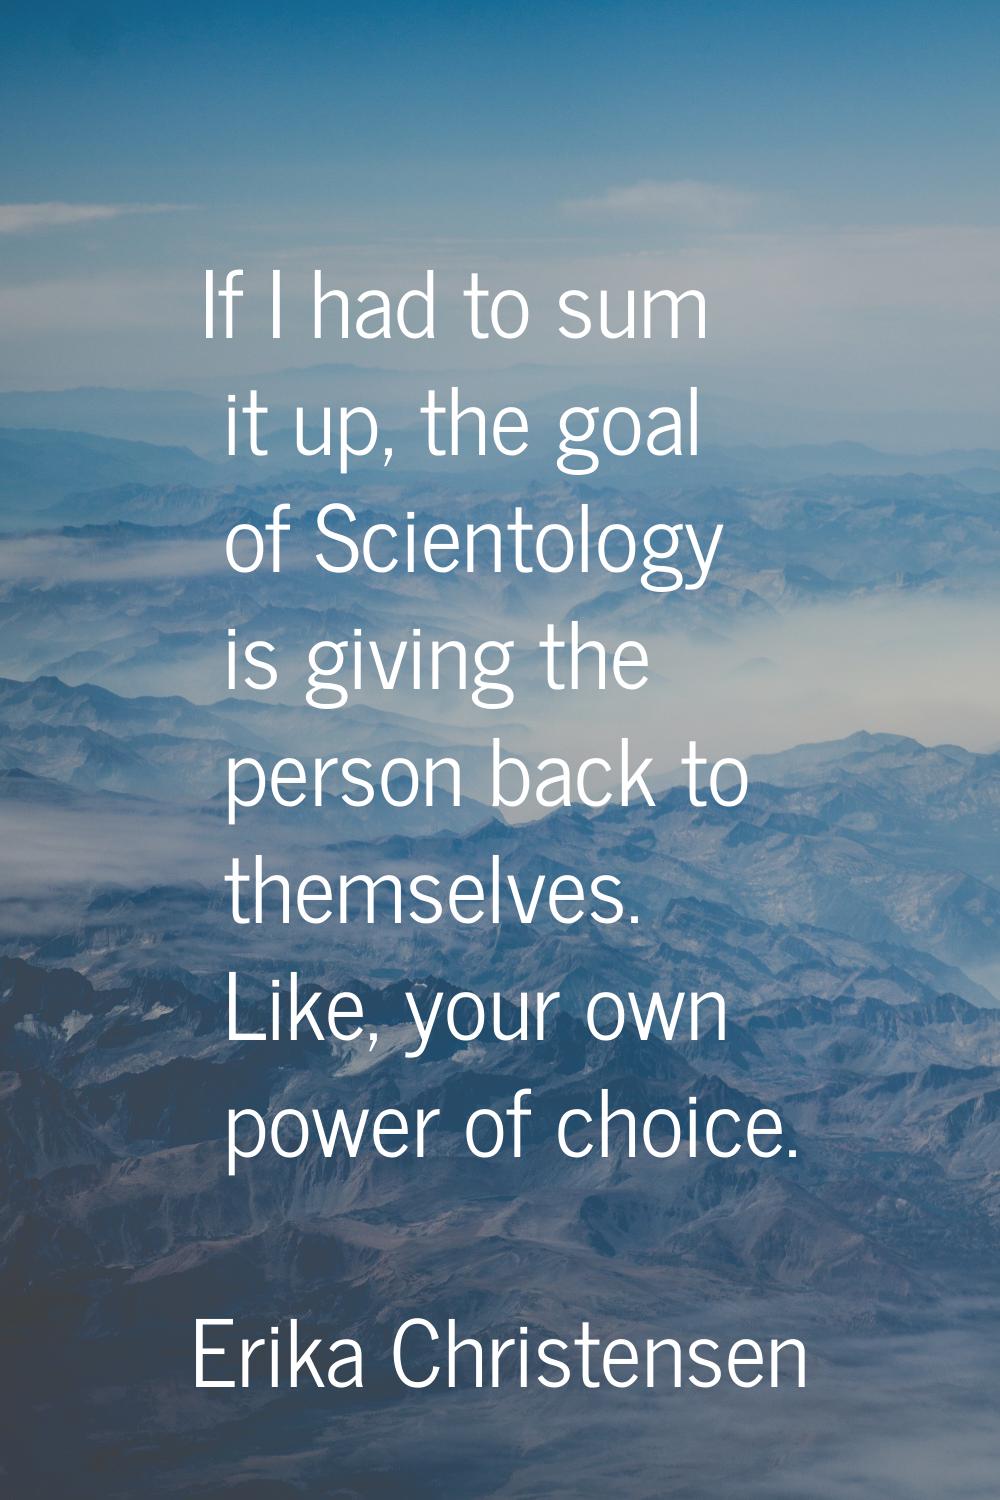 If I had to sum it up, the goal of Scientology is giving the person back to themselves. Like, your 